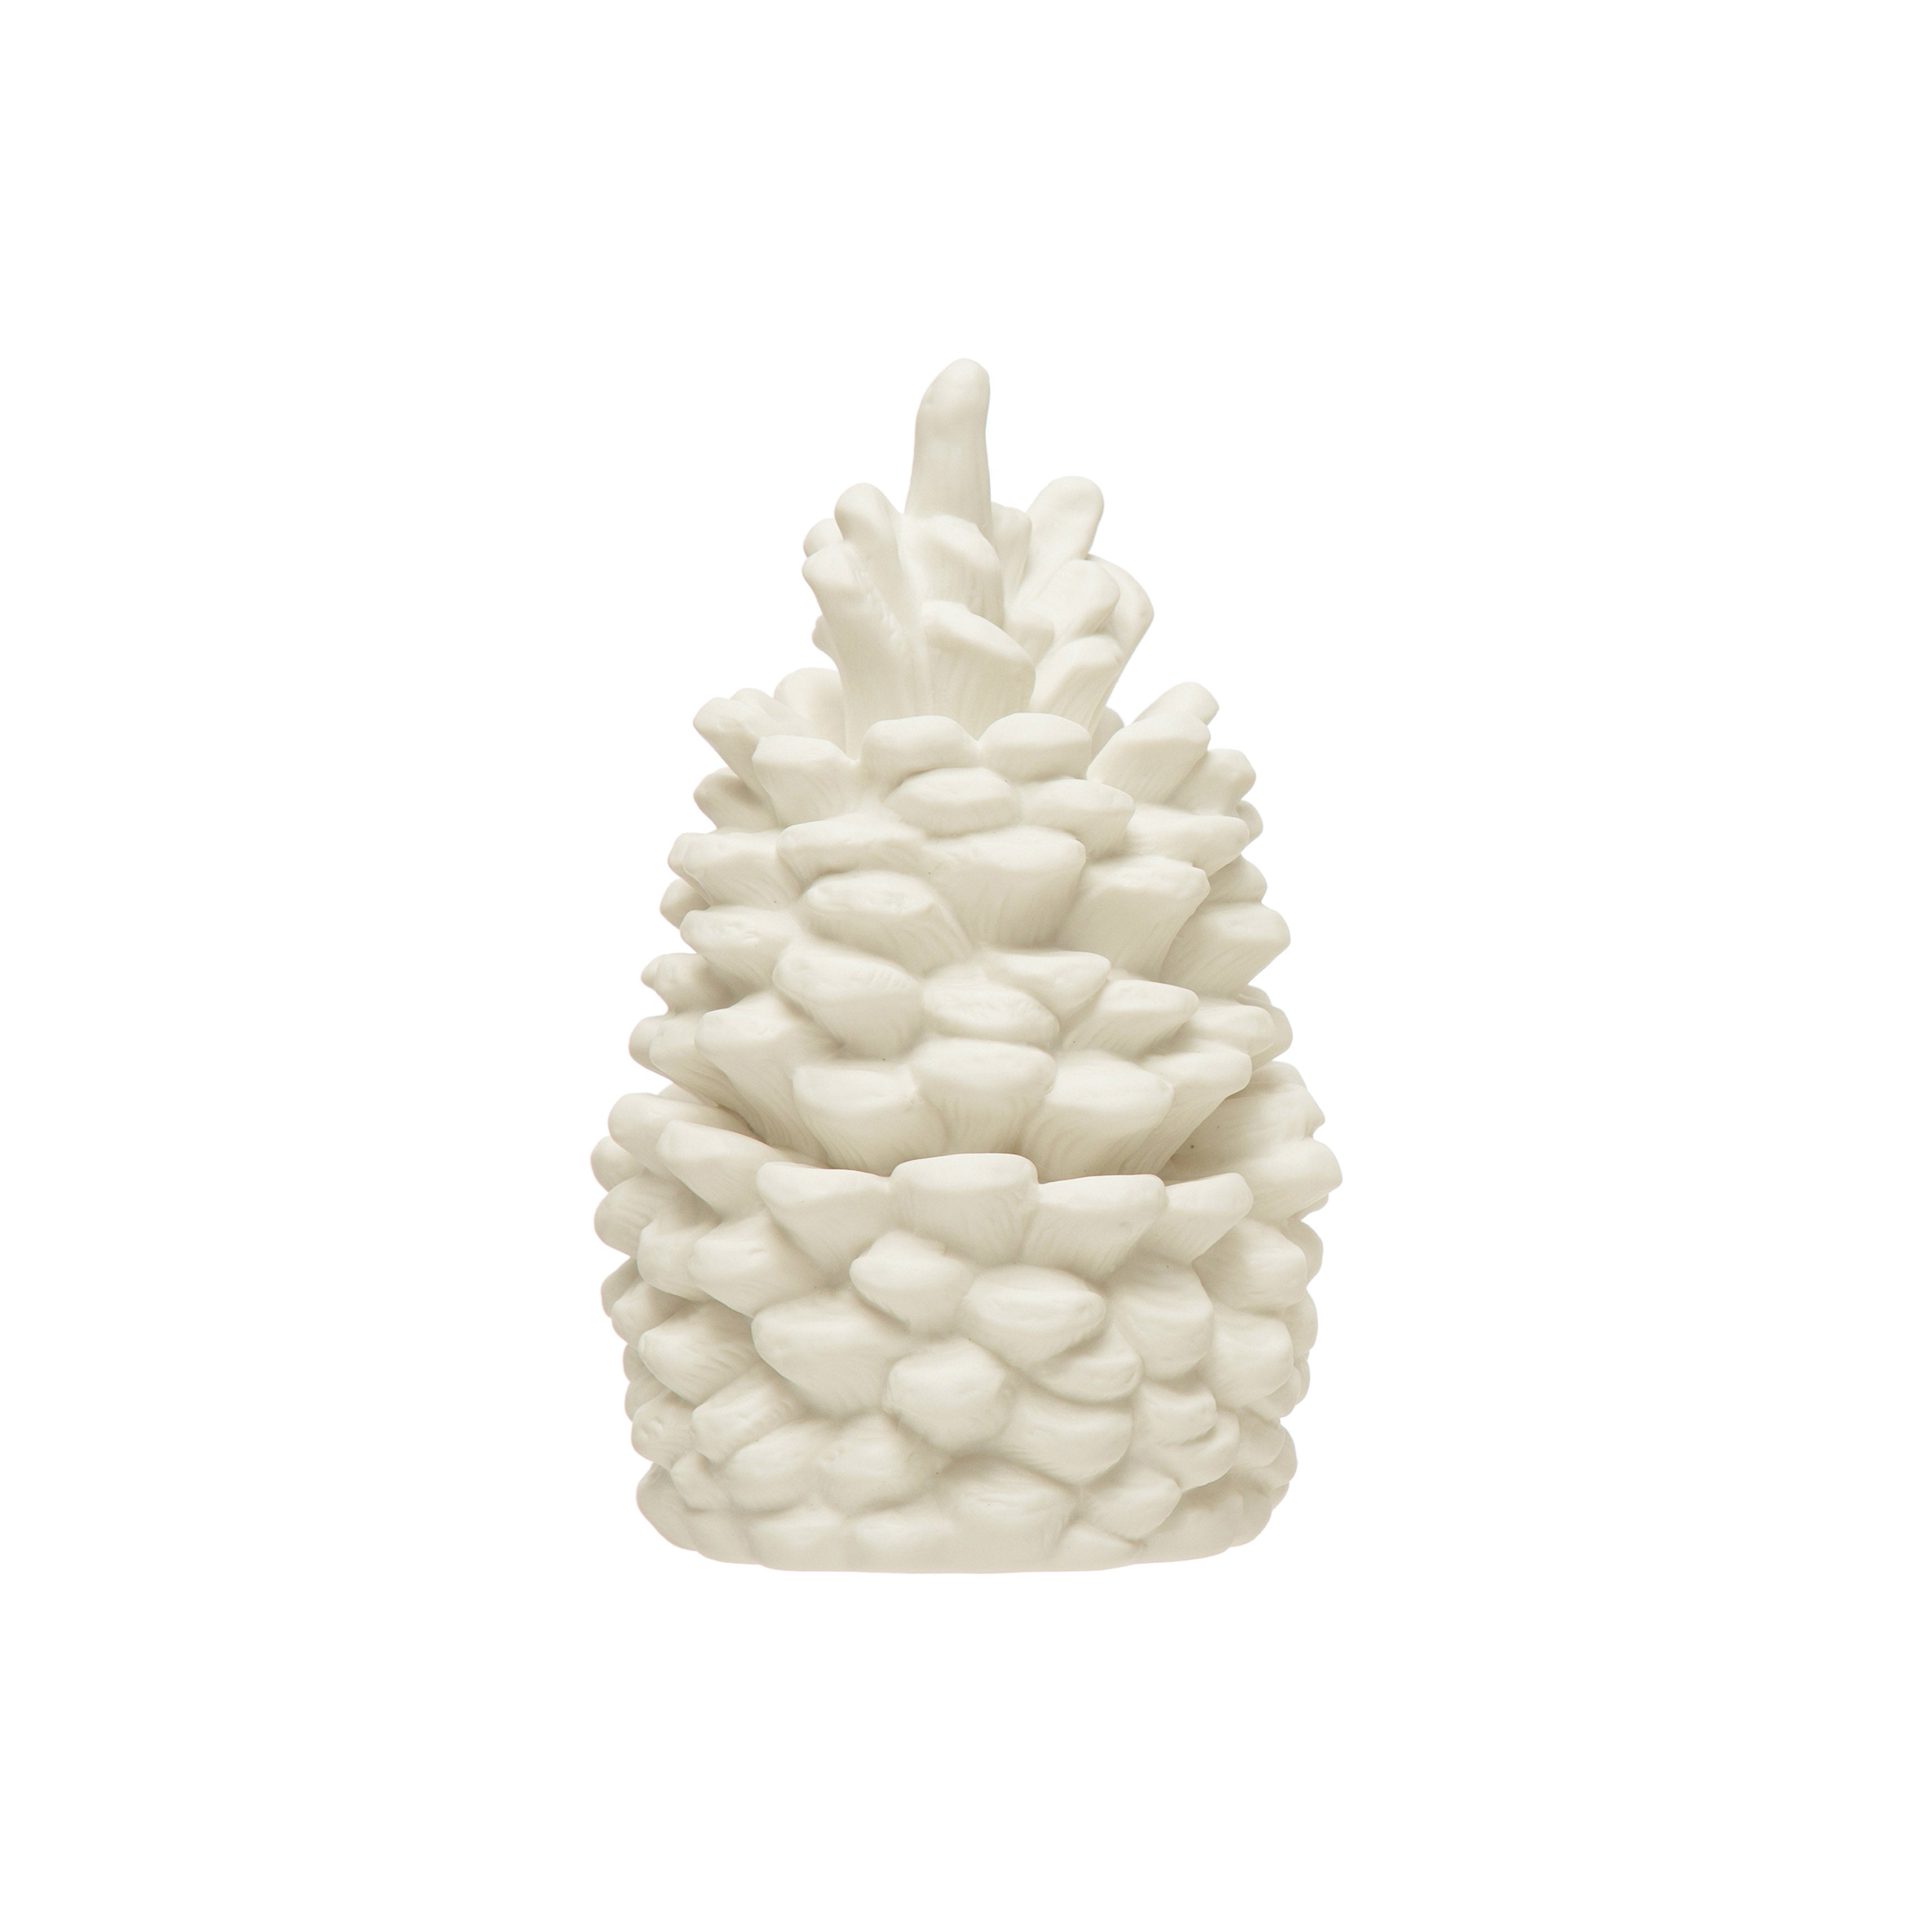 Bisque Pinecone Object (L)